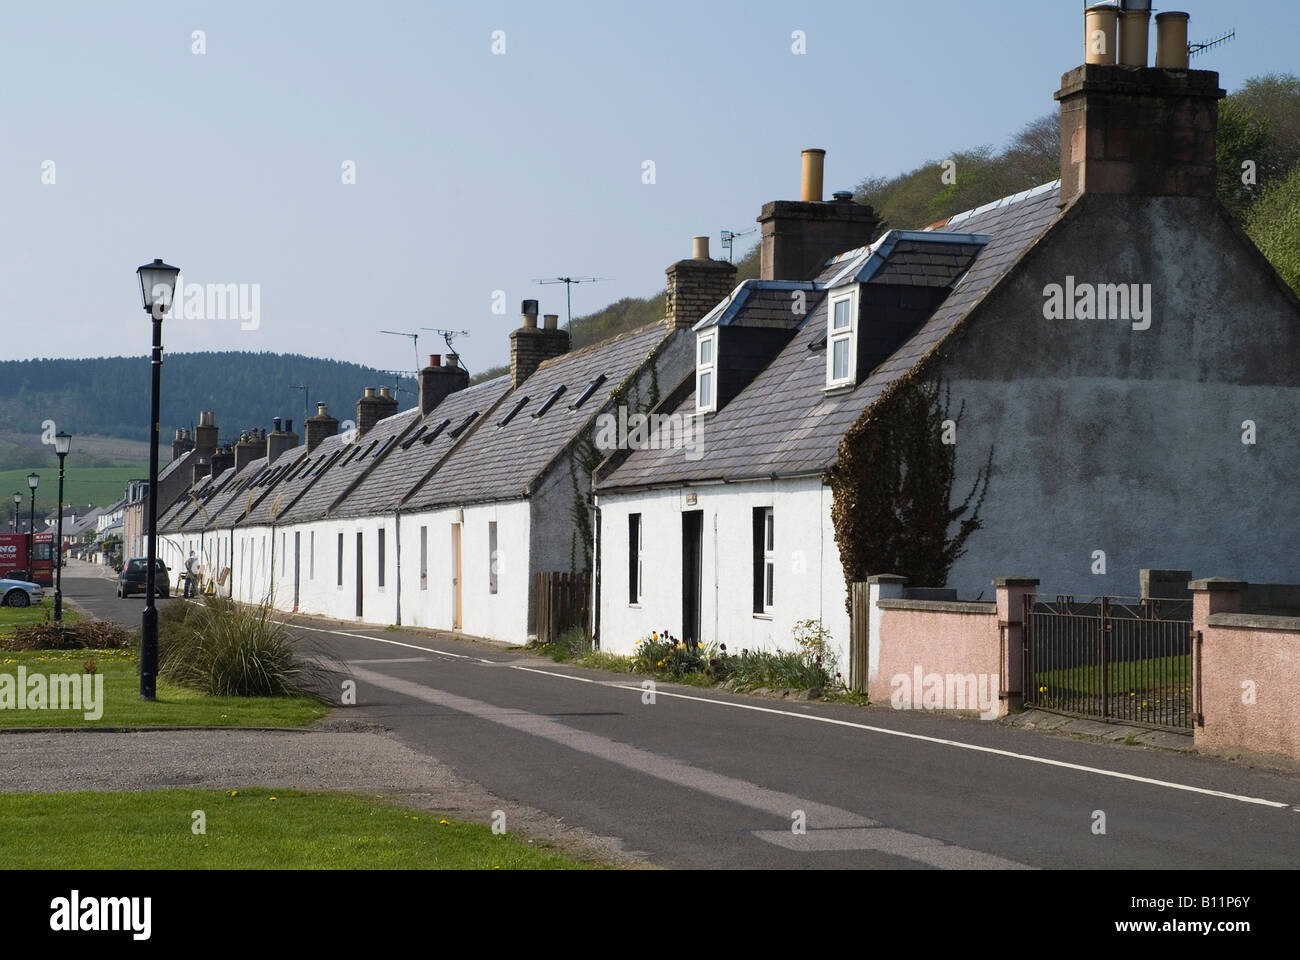 dh Fishing village cottages AVOCH BLACK ISLE ROSS CROMARTY Scottish cottage Houses seafront road scotland highlands street Stock Photo